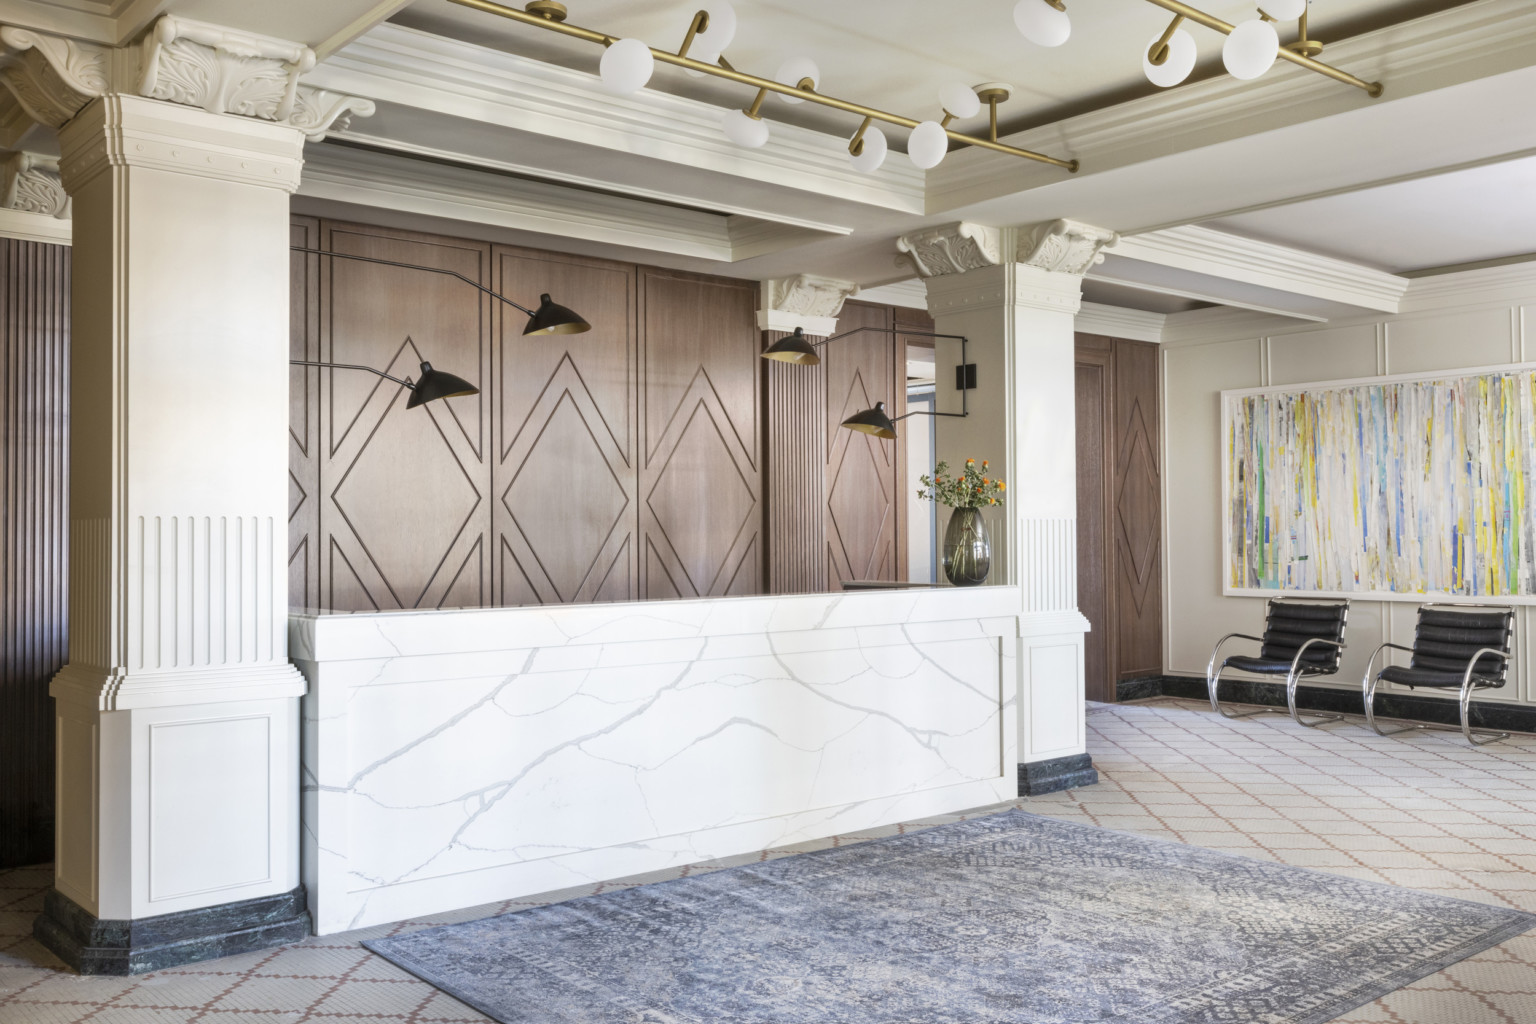 Lobby with white marble reception desk between Corinthian columns in front of geometric wood wall. Blue rug in front of desk